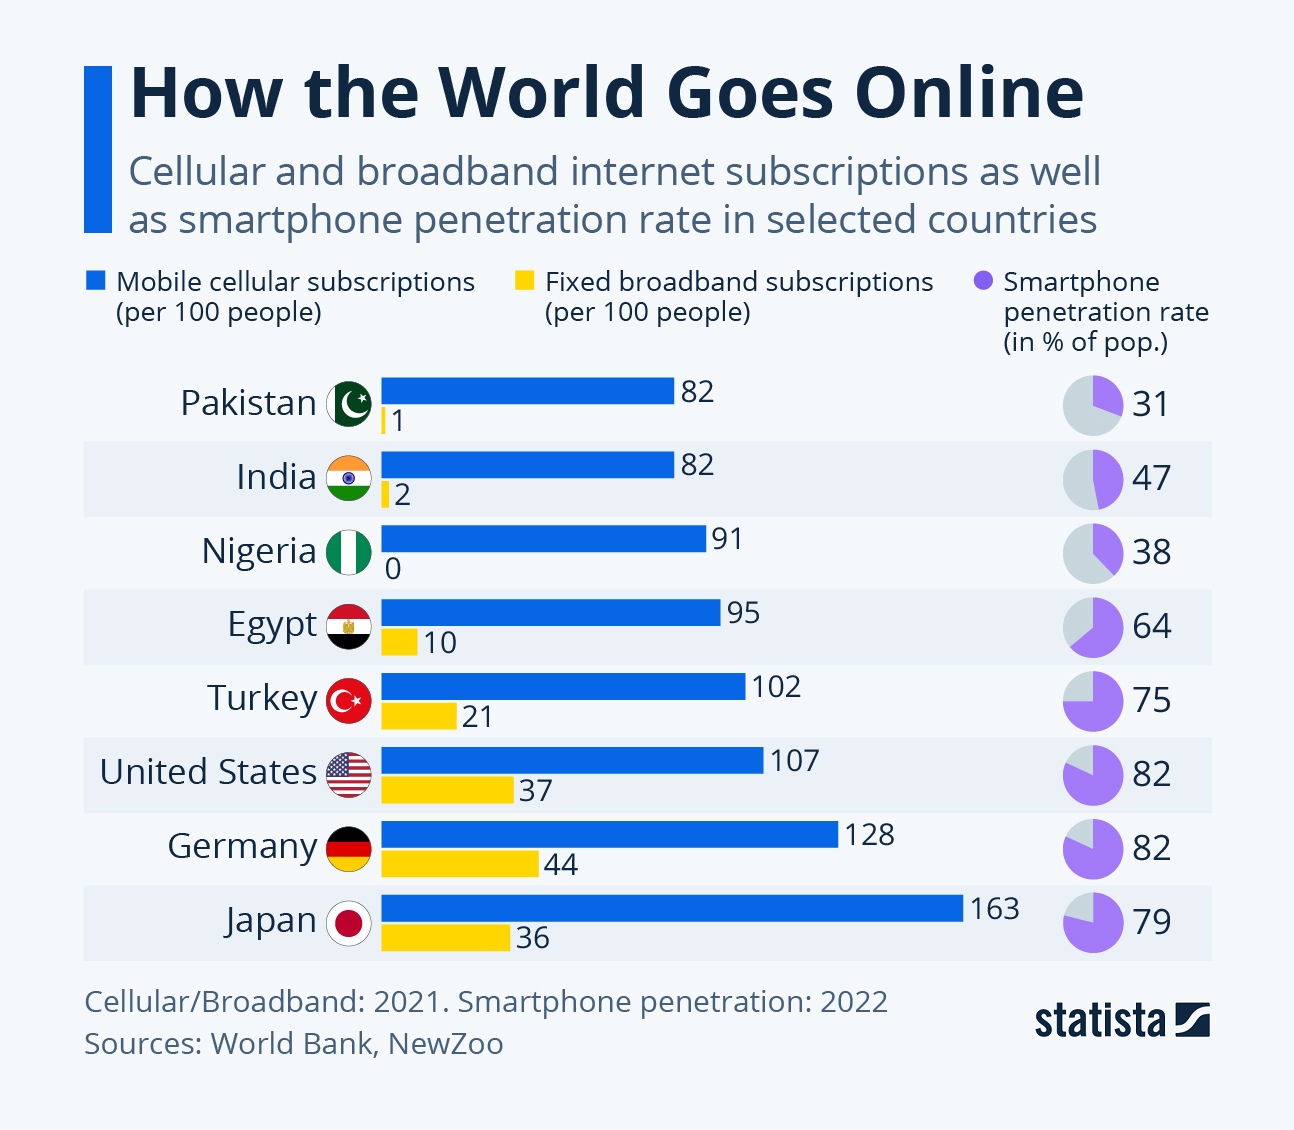 This infographic illustrates cellular and broadband internet subscriptions as well as smartphone penetration rates in selected countries.